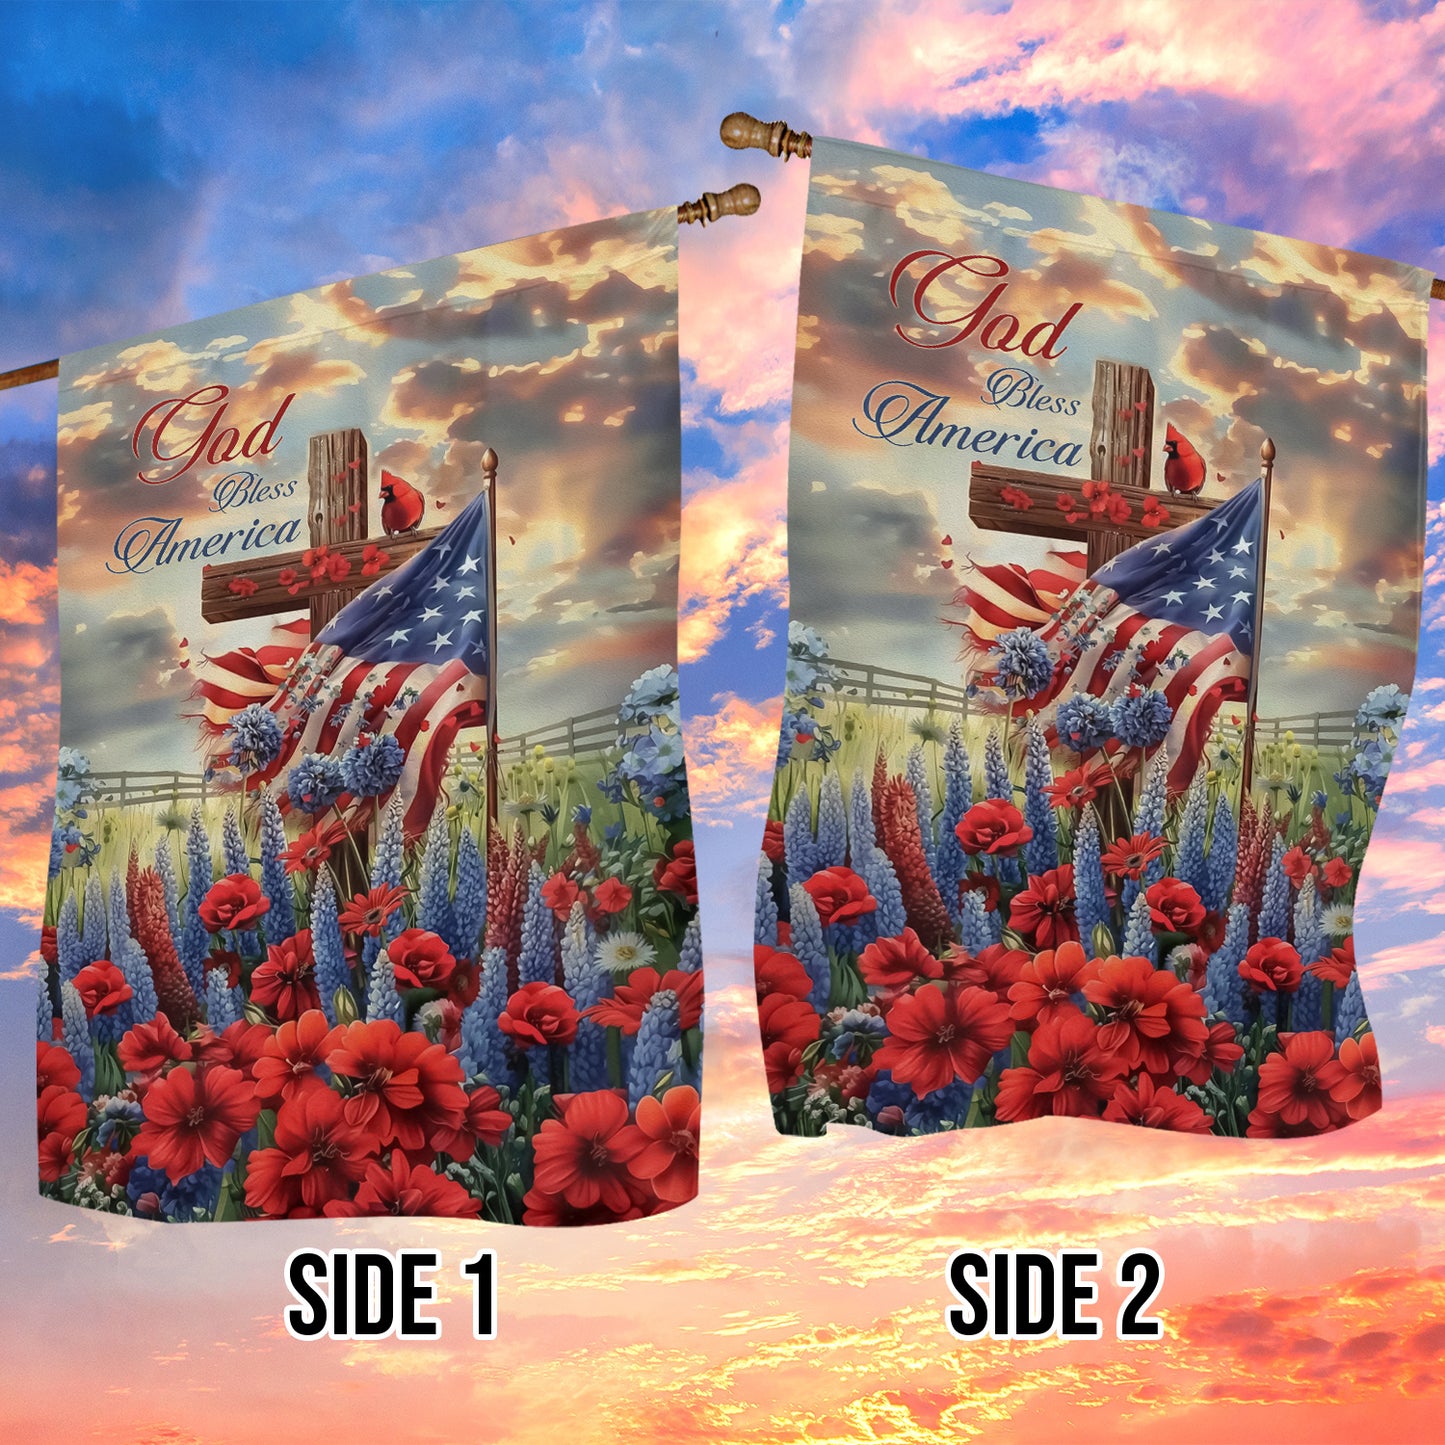 July 4th Garden Flag & House Flag, Garden Of Patriotism, Independence Day Yard Flag Gift For America Lovers